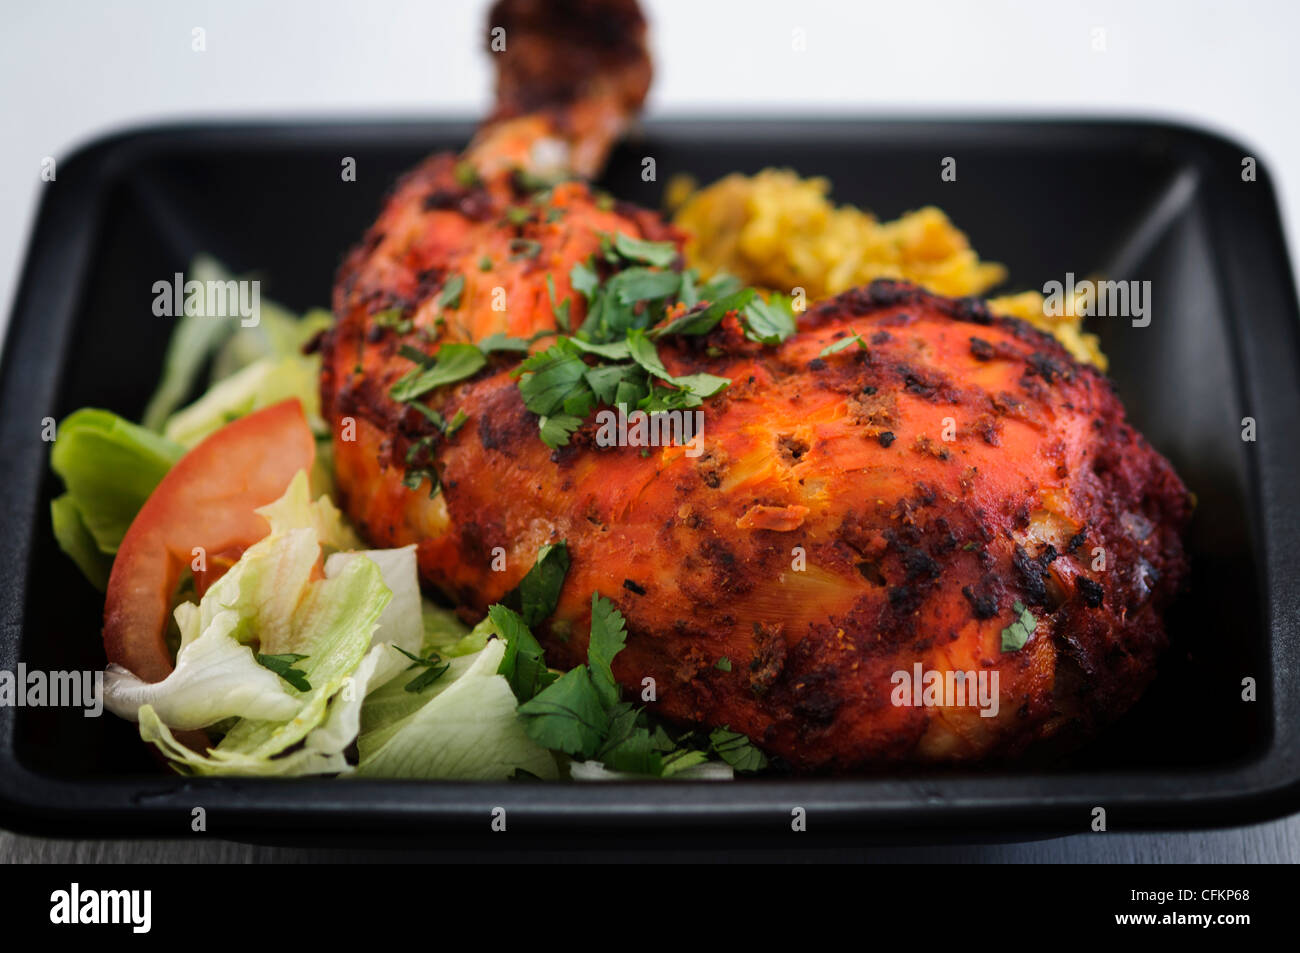 Meal of tandoori chicken leg with saffron rice and salad on black plate garnished with chopped coriander Stock Photo